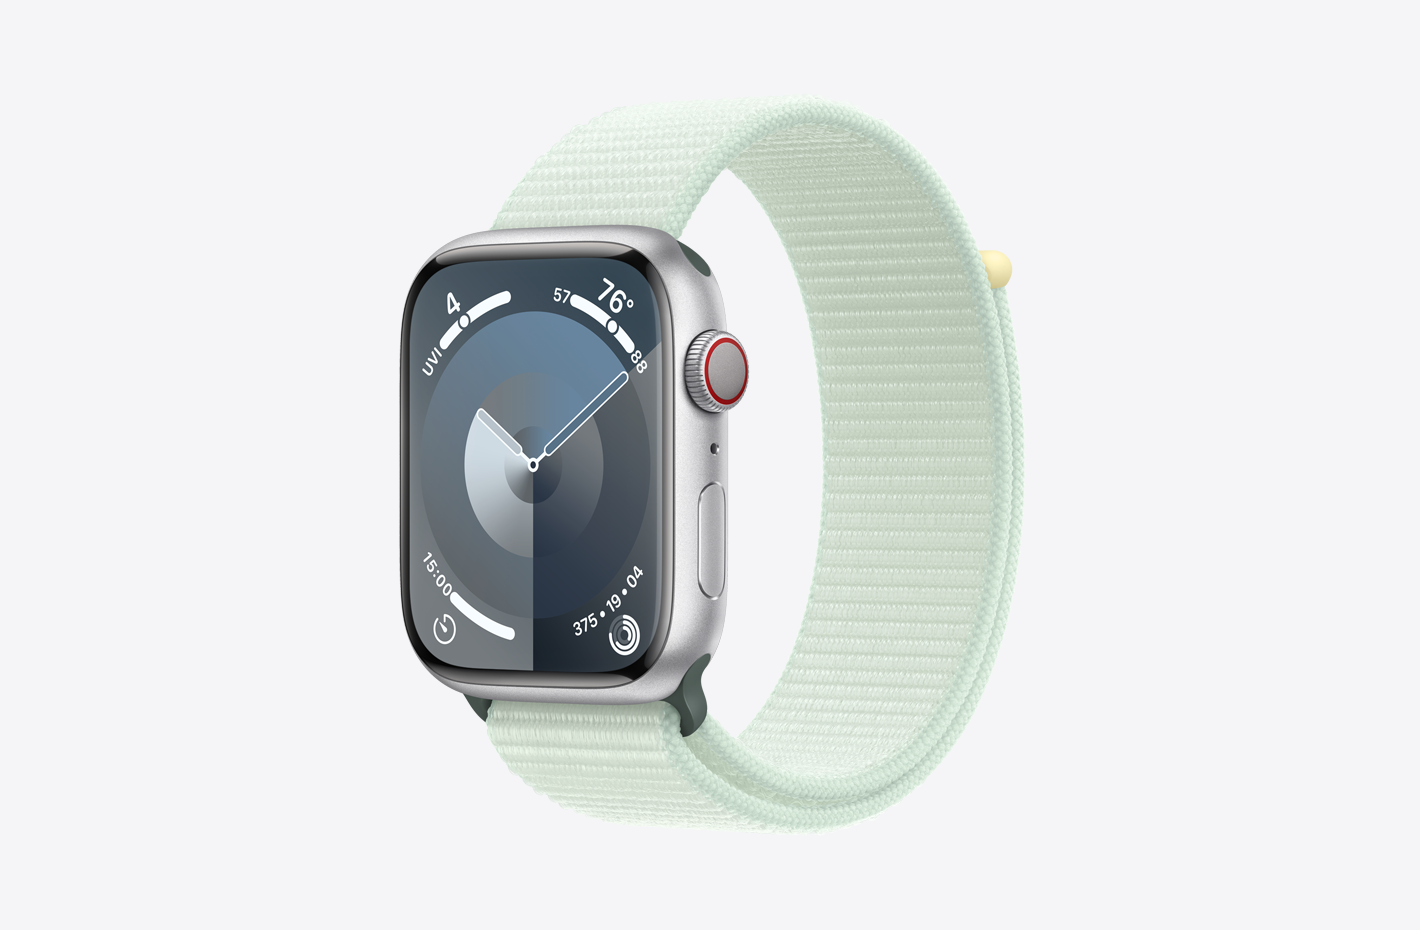 Apple Watch with Silver Aluminum case with matte finish and angled view of Soft Mint (green) Sport Loop, featuring a hook-and-loop fastener and double-layer nylon weave